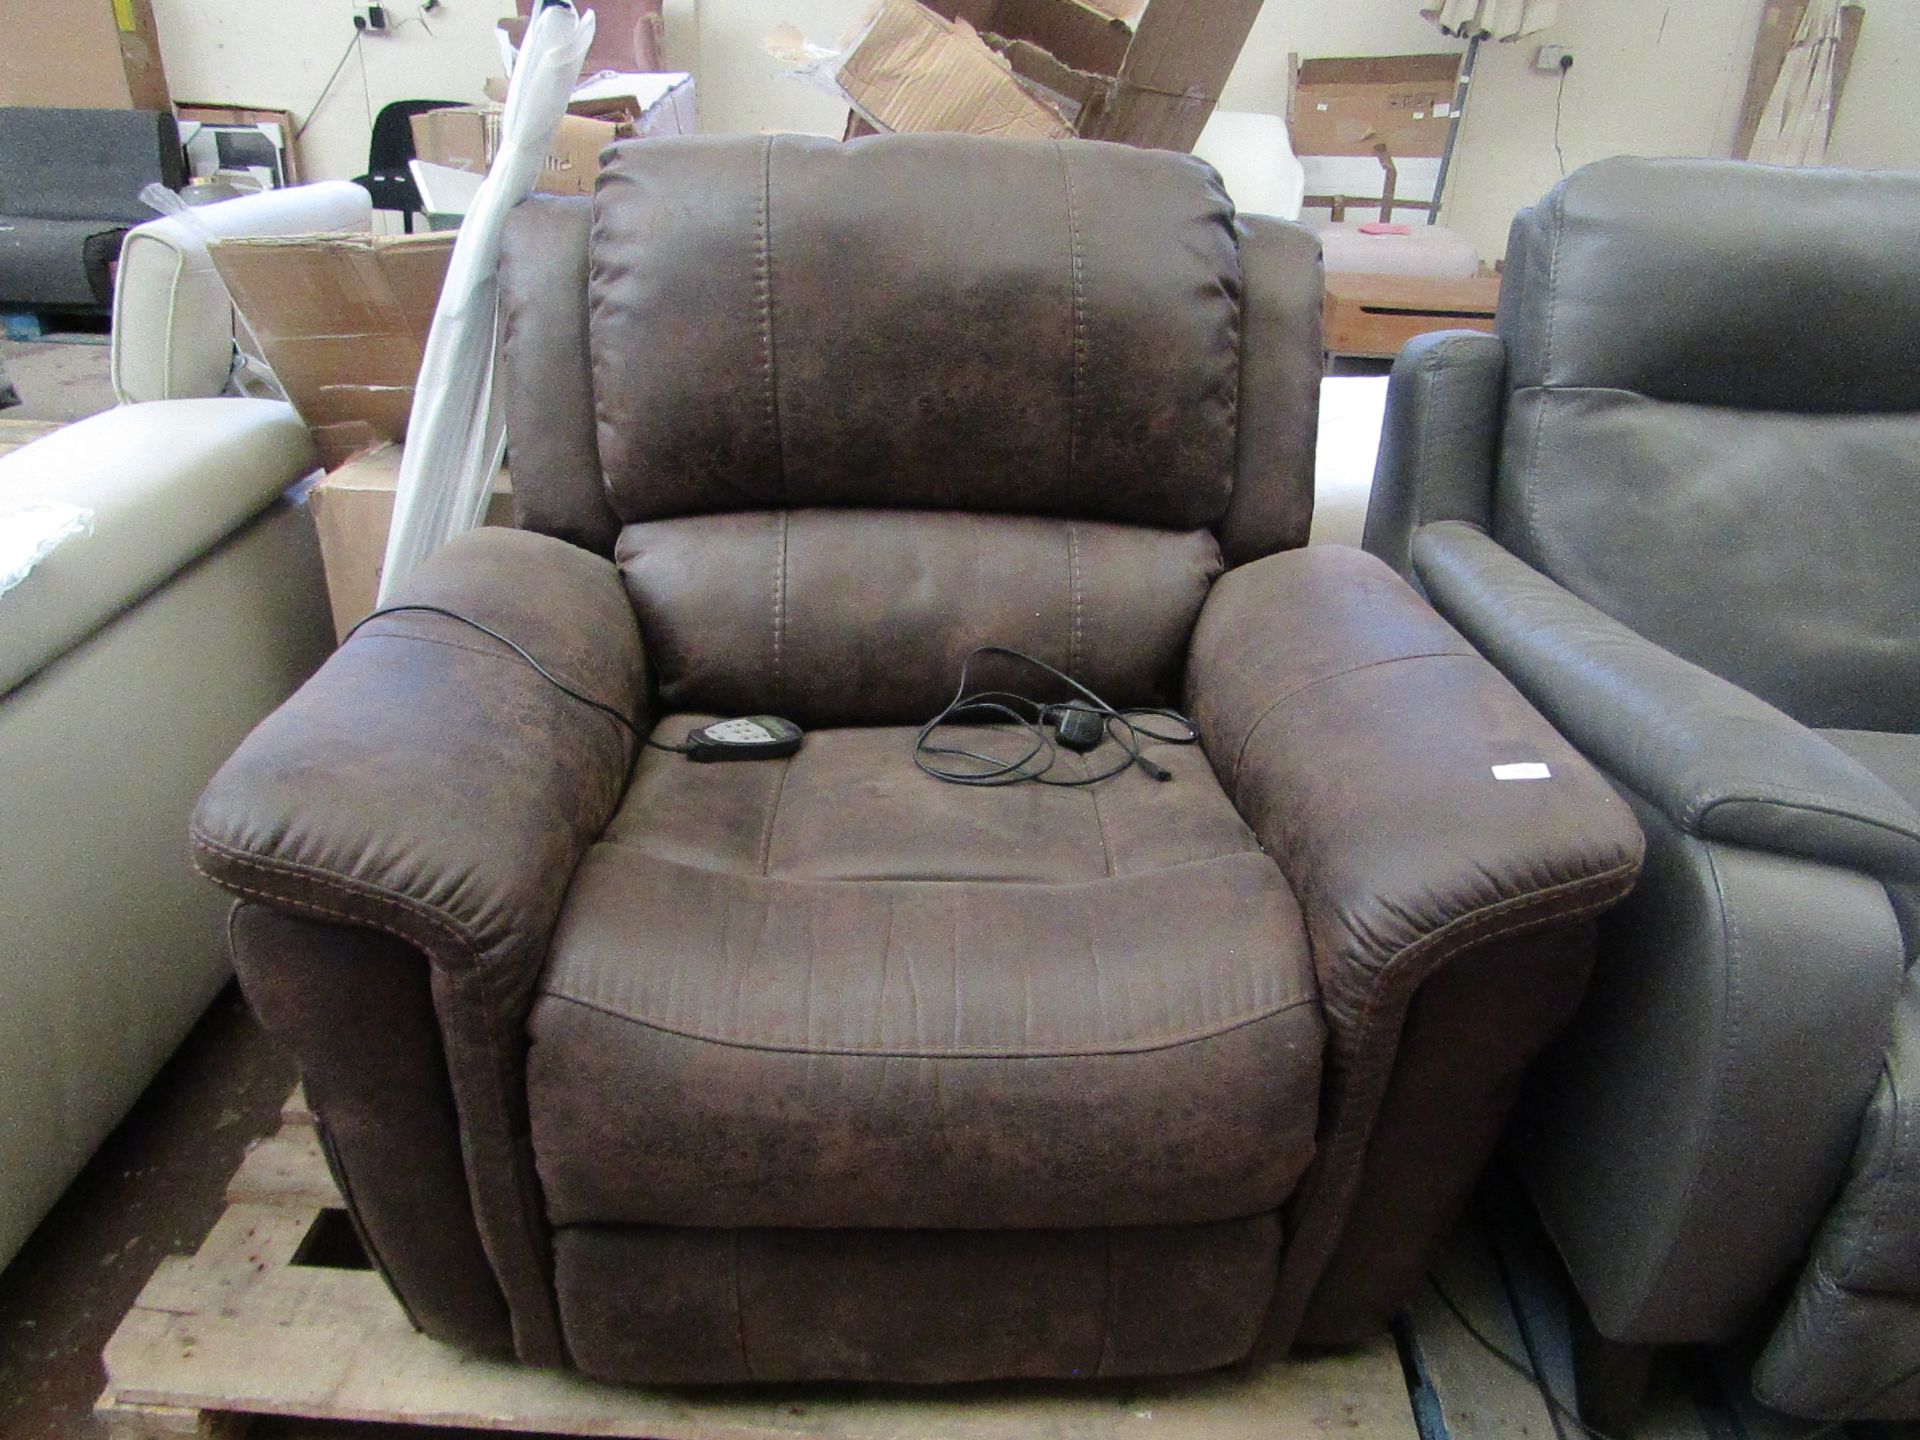 Brown Suede Style Recliner Chair - Aged but still In good condition - Tested Working